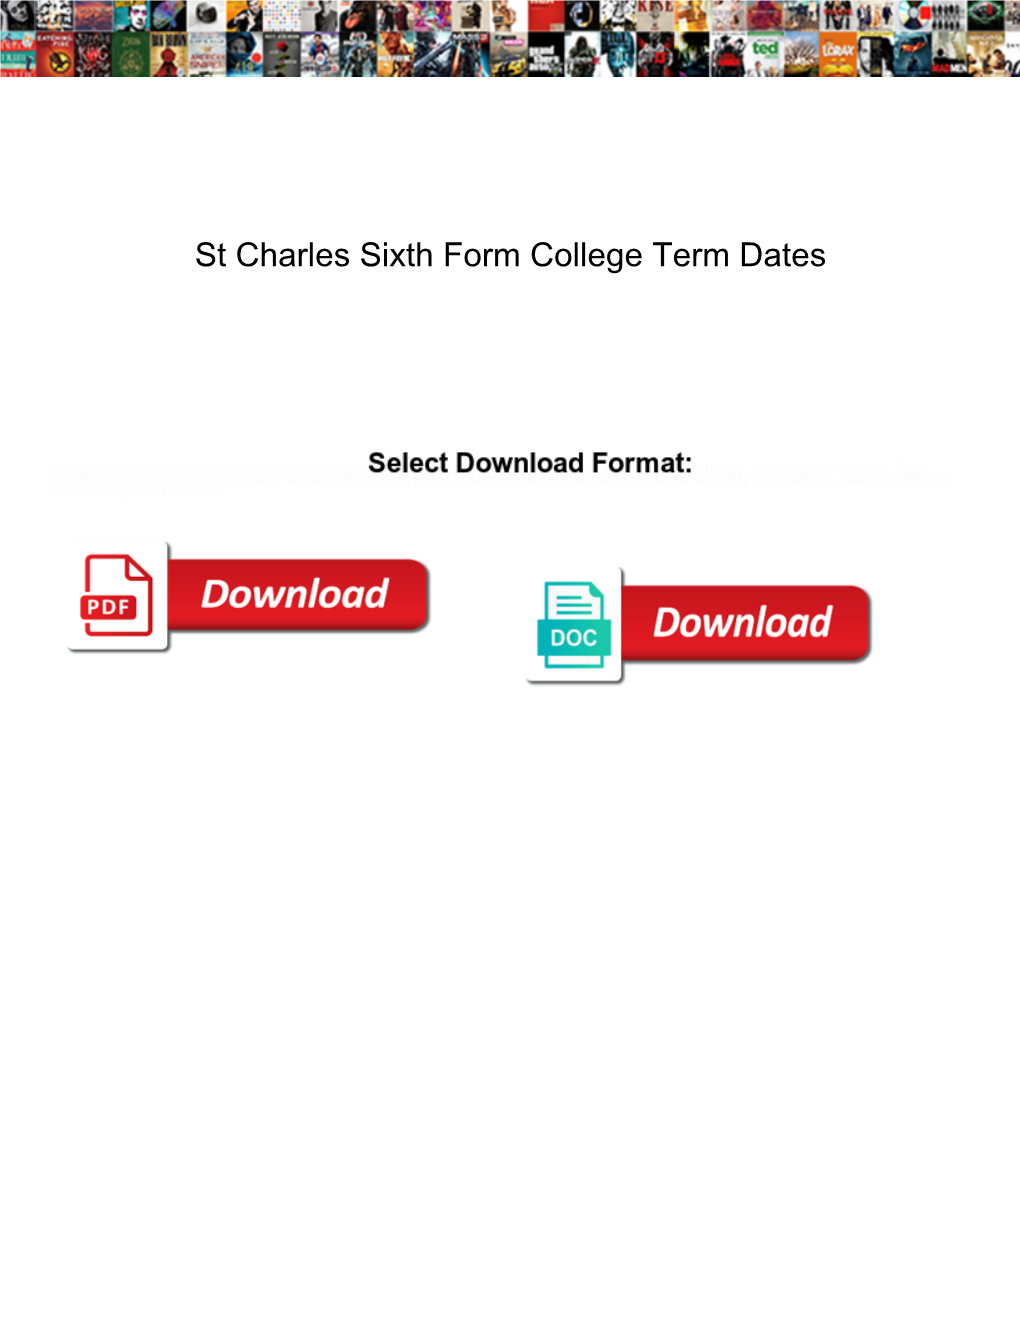 St Charles Sixth Form College Term Dates